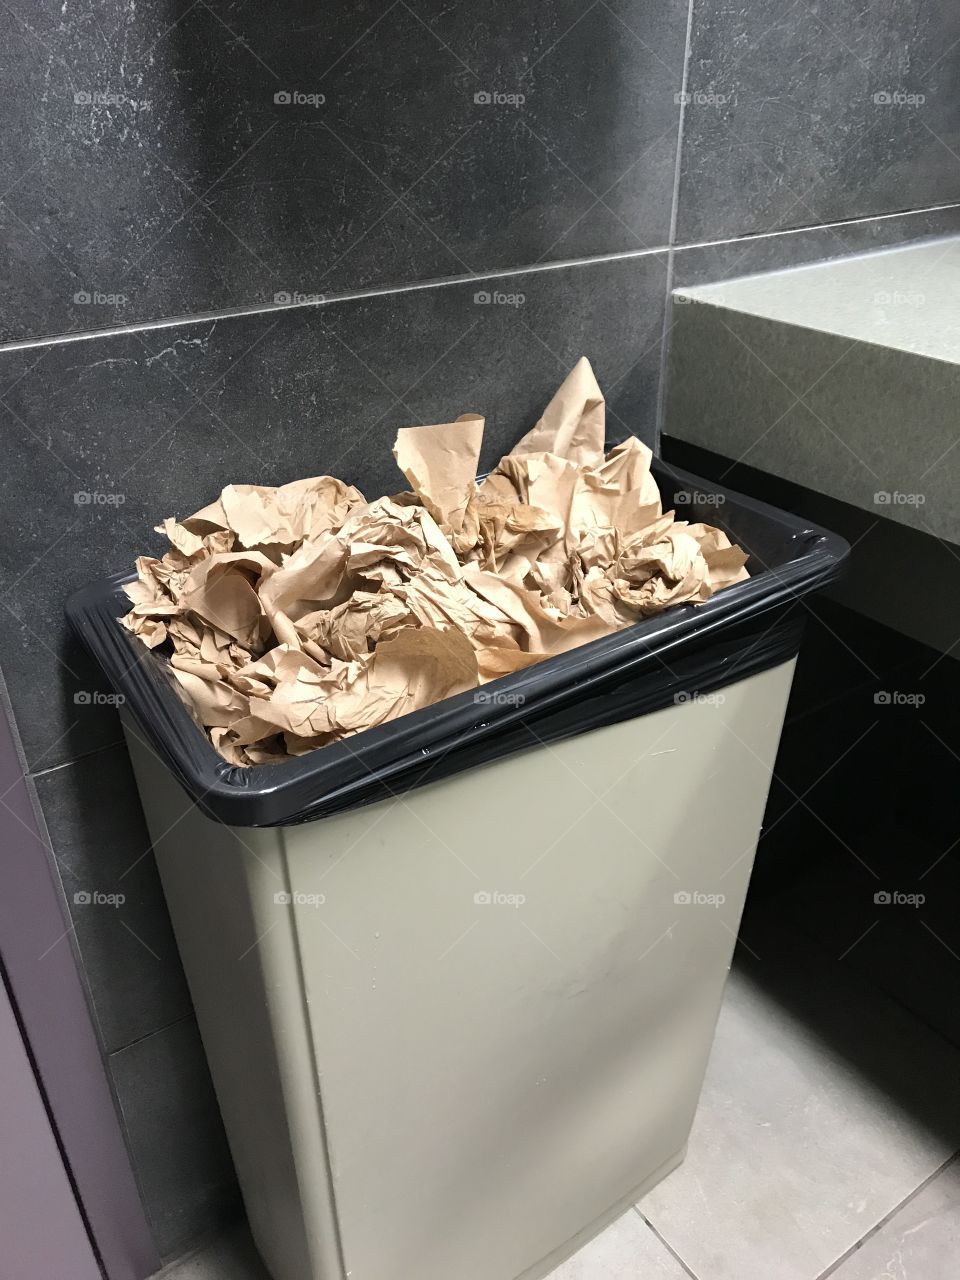 Paper trash can